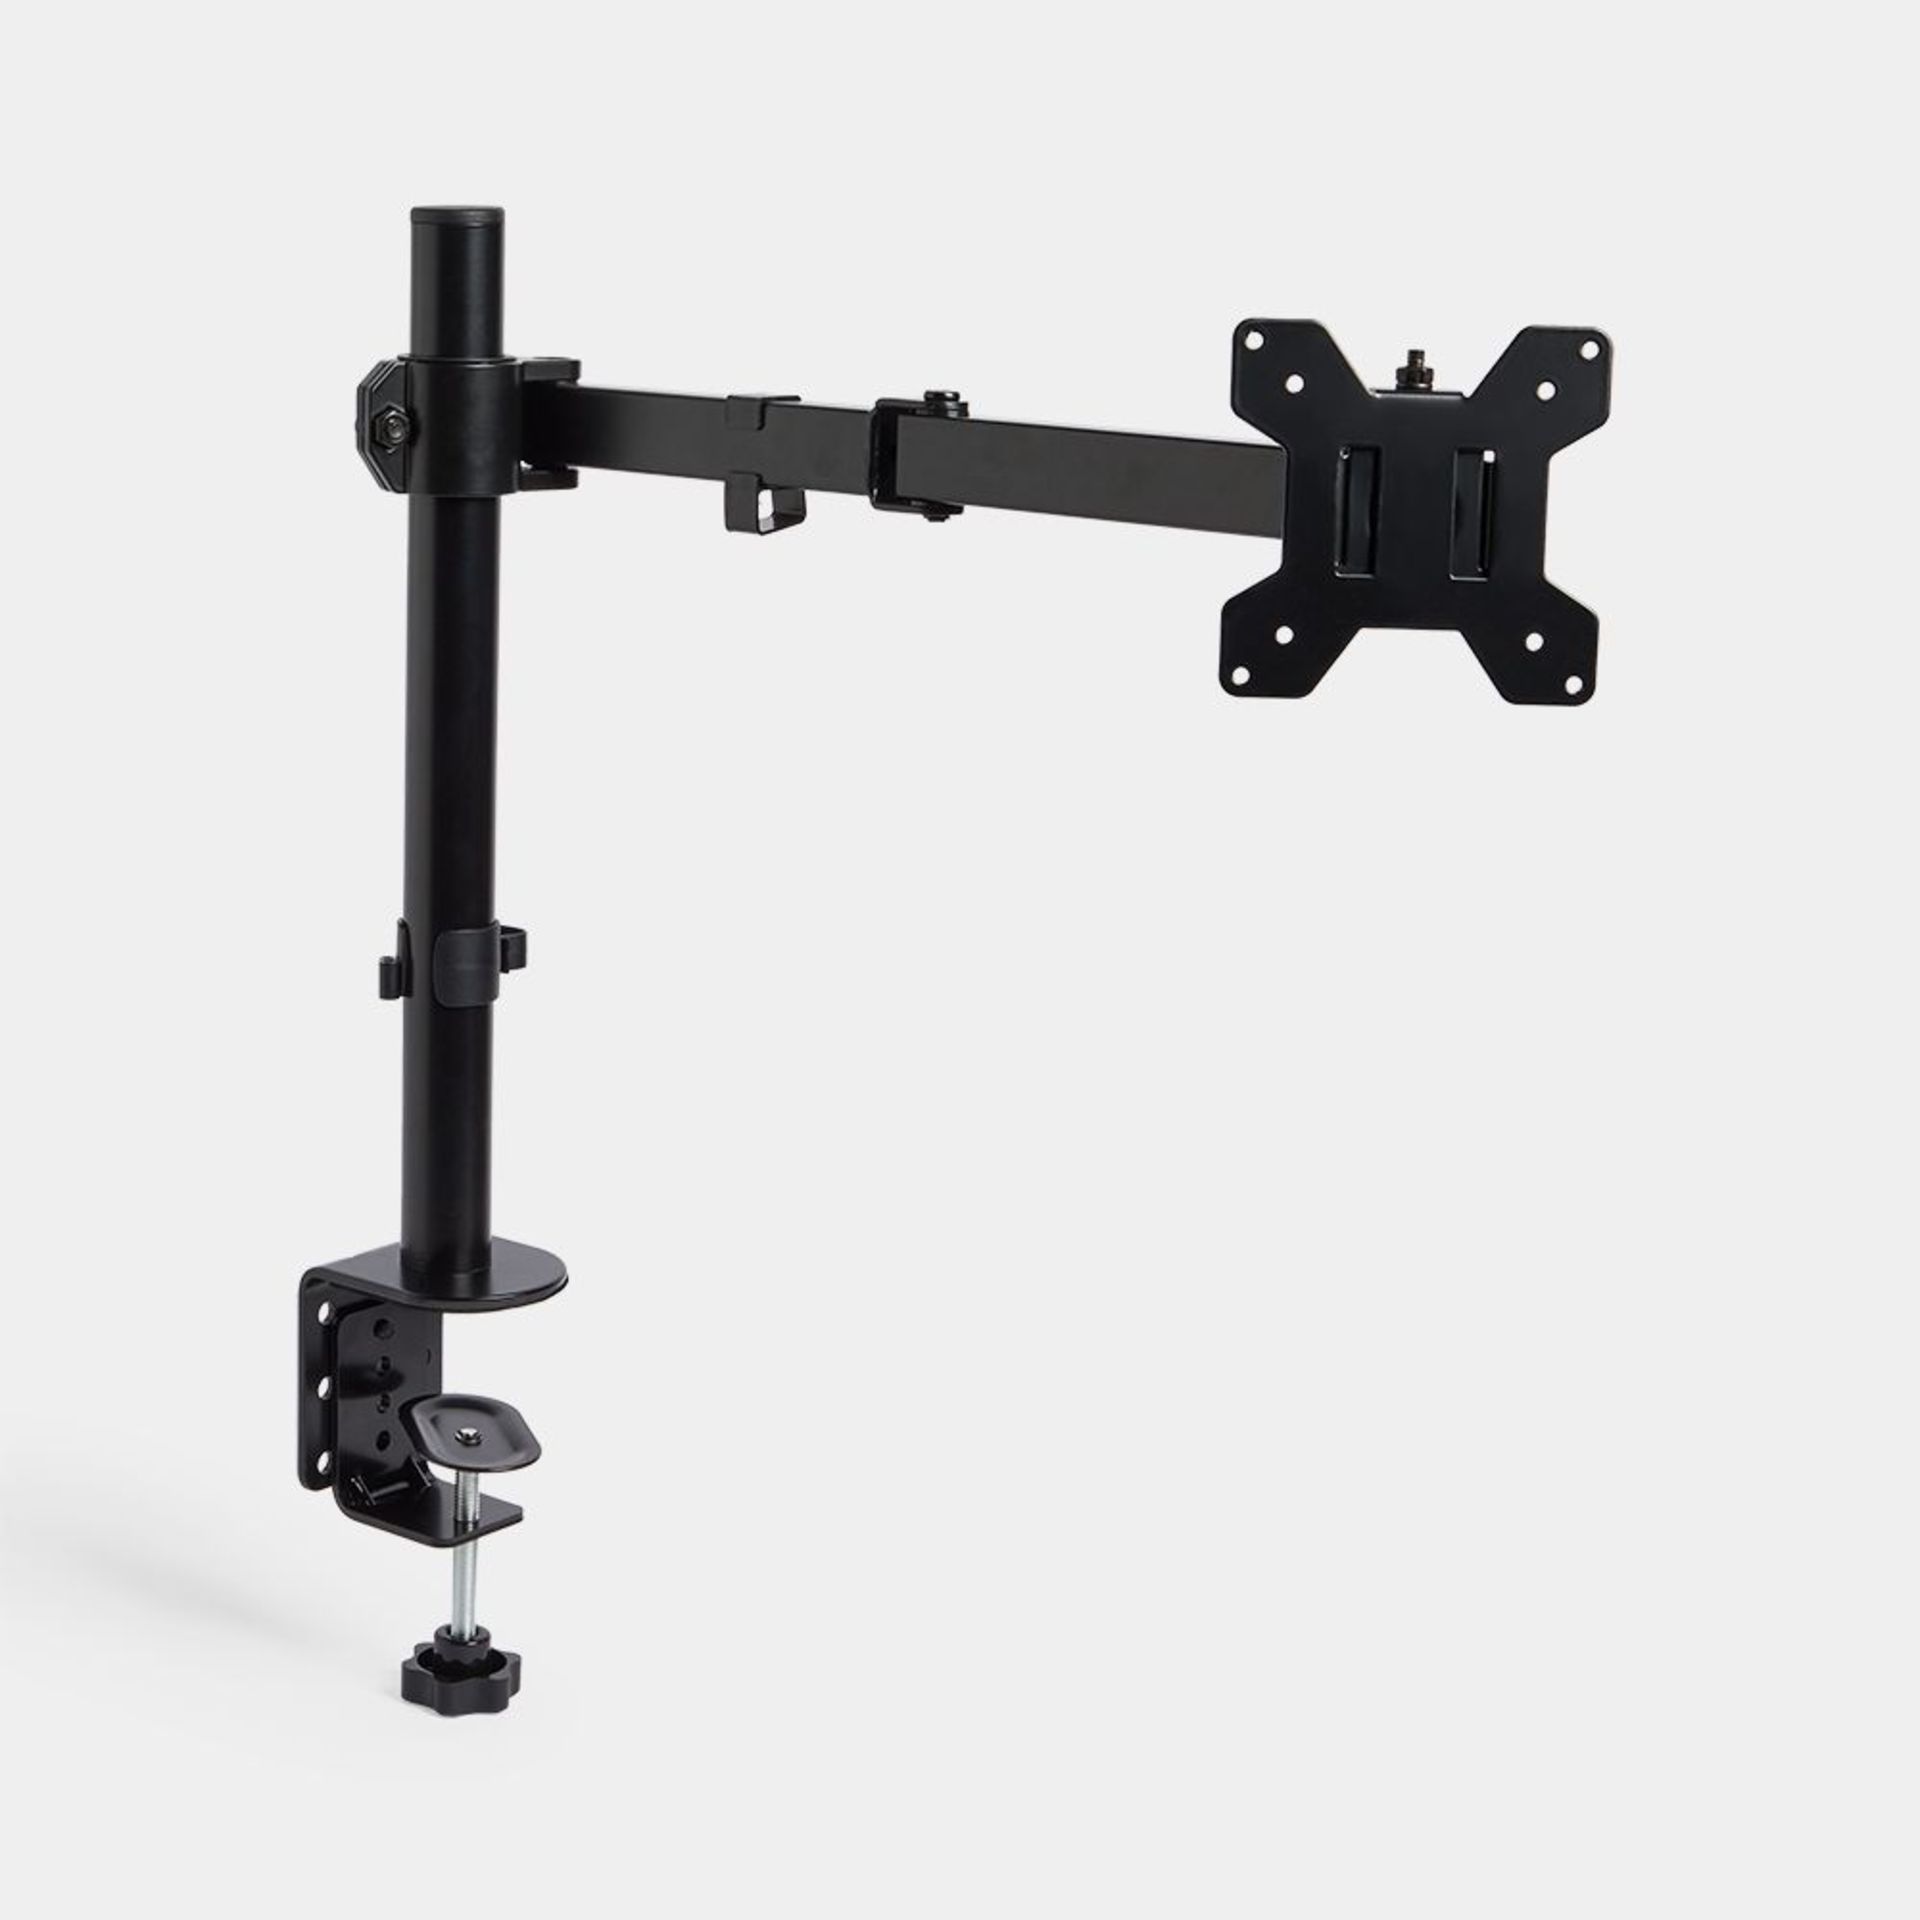 Single Monitor Mount with Clamp. - R8. Positioning your monitor in the optimum position has the